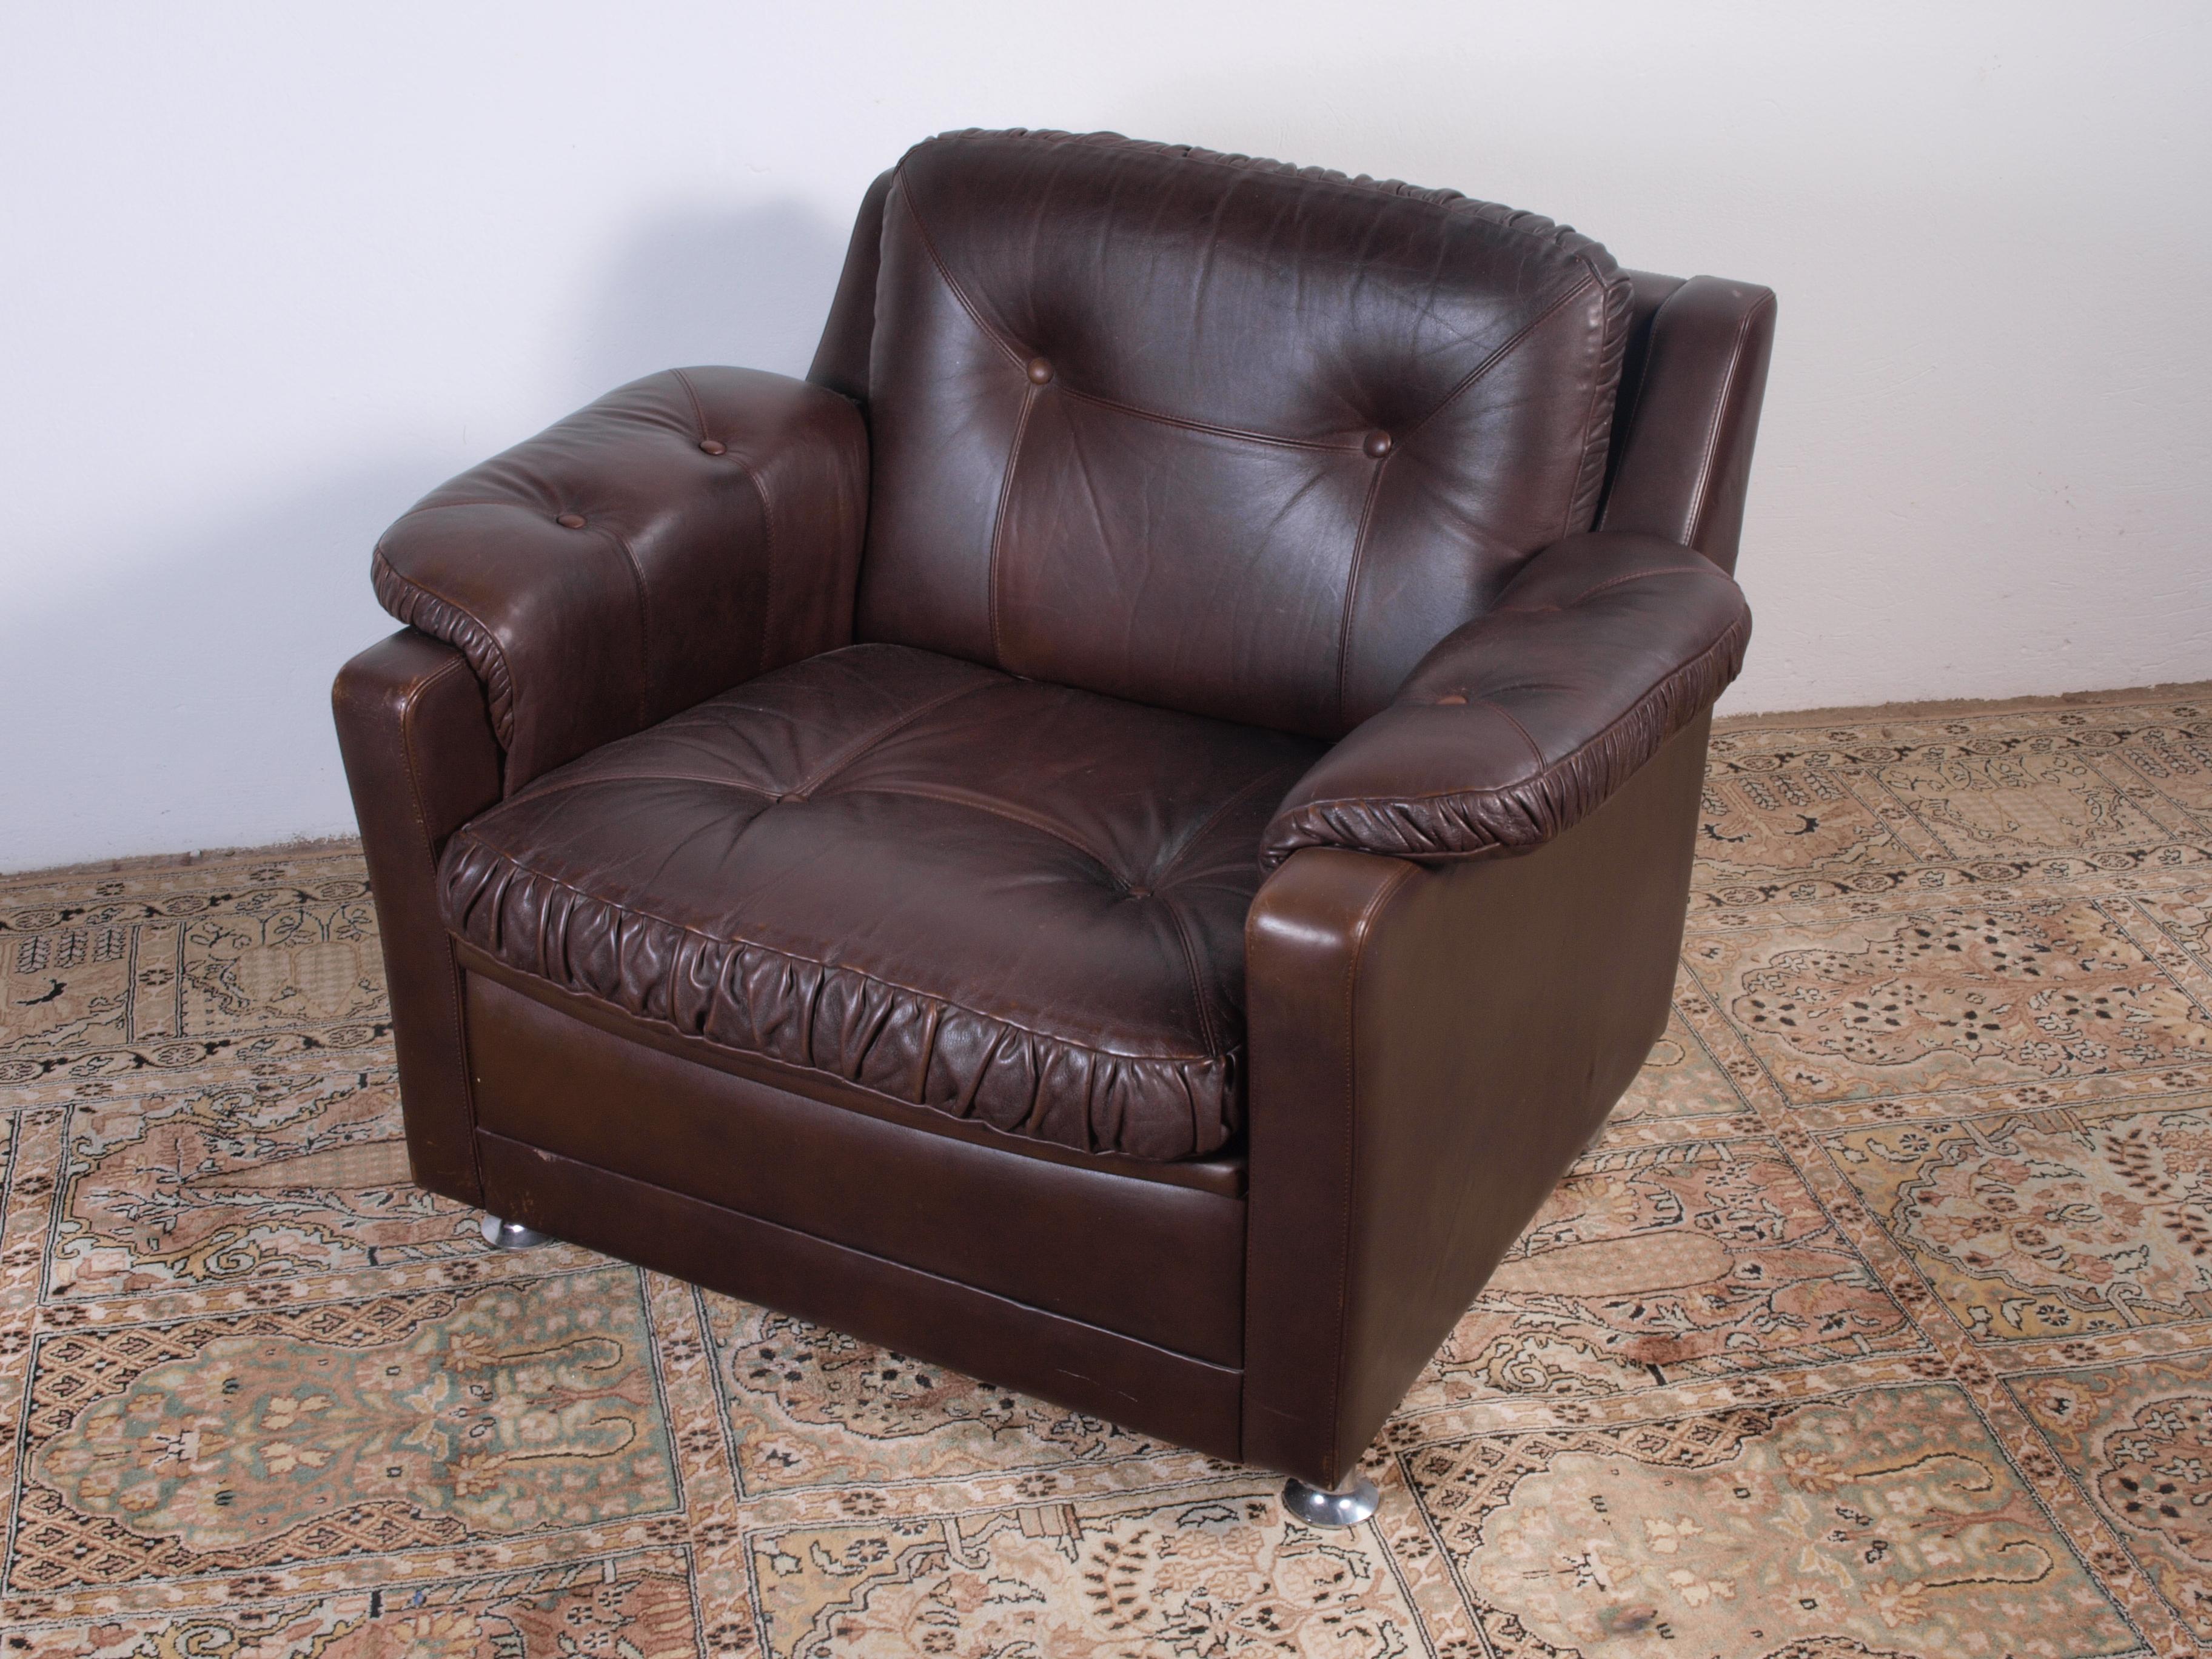 Beautiful leather lounge chair from a danish designer and manufactor in the 1970s. Pair it up with your other furnitures from Bauhaus, art deco or a modern italian 1980s style. This chair is very comfortable and soft.

It has wheels on the back to